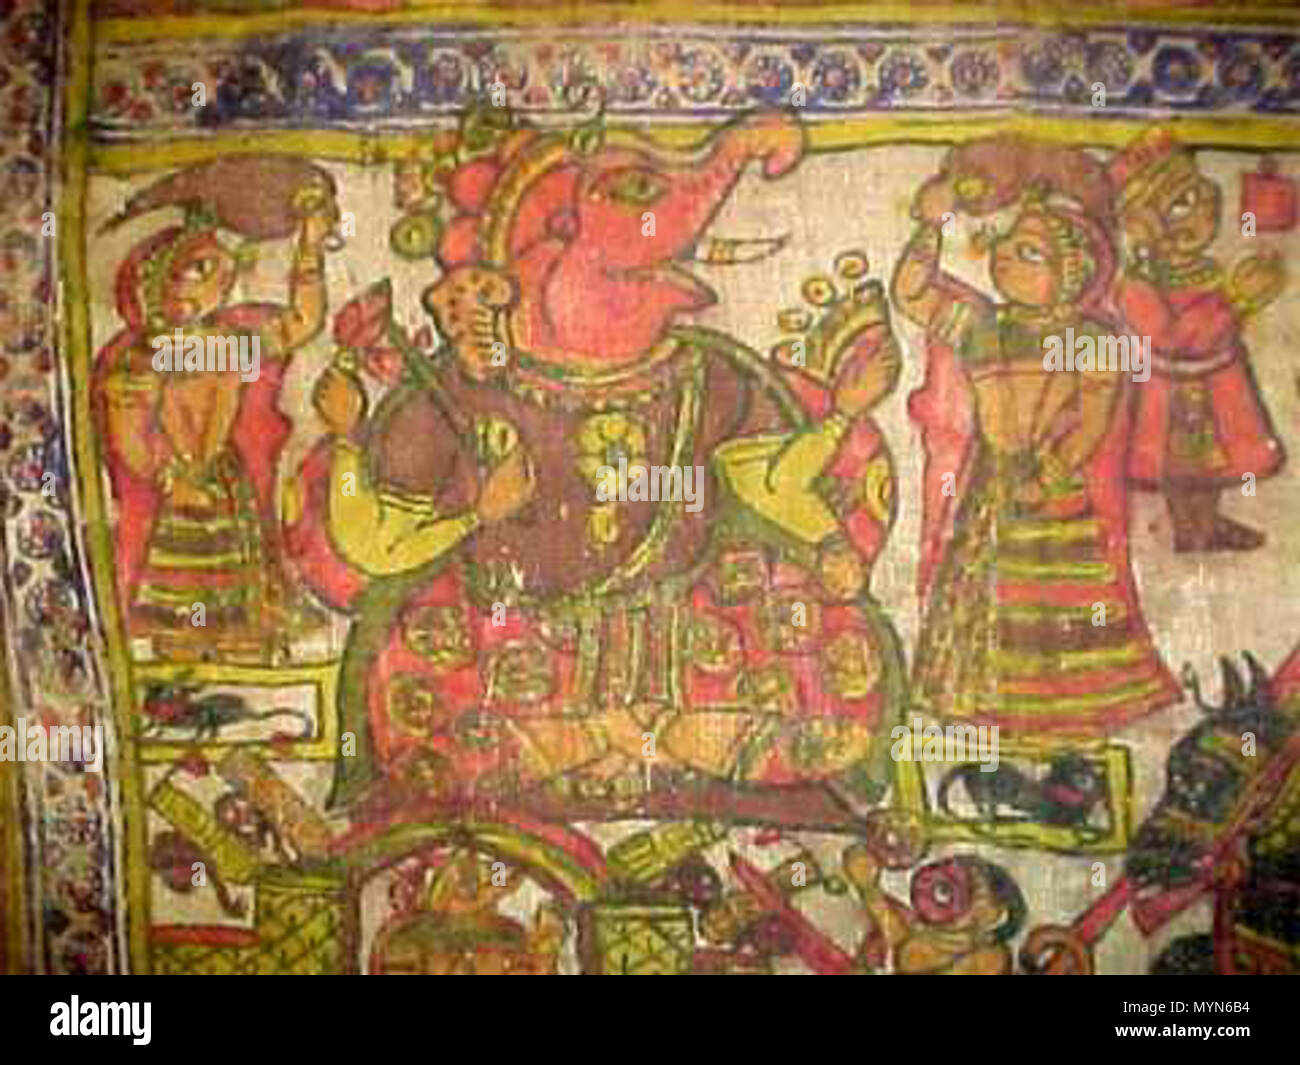 . English: A series of images of another par of Pabuji, this one from the early 19th century Source: ebay, April 2002 'This is an old (mid 1800s or earlier) Par. The painted textile is approximately 16 feet long and 55 1/2 inches wide. The story painting has been used to relay the story many times through the years and shows normal wear, especially on the bottom edge. There are some old repairs. The textile is made of two narrow pieces ( 26 3/4') sewen together. It appears to be an old linen-type material.' . early 19th century. Unknown 403 Pabuji2h Stock Photo